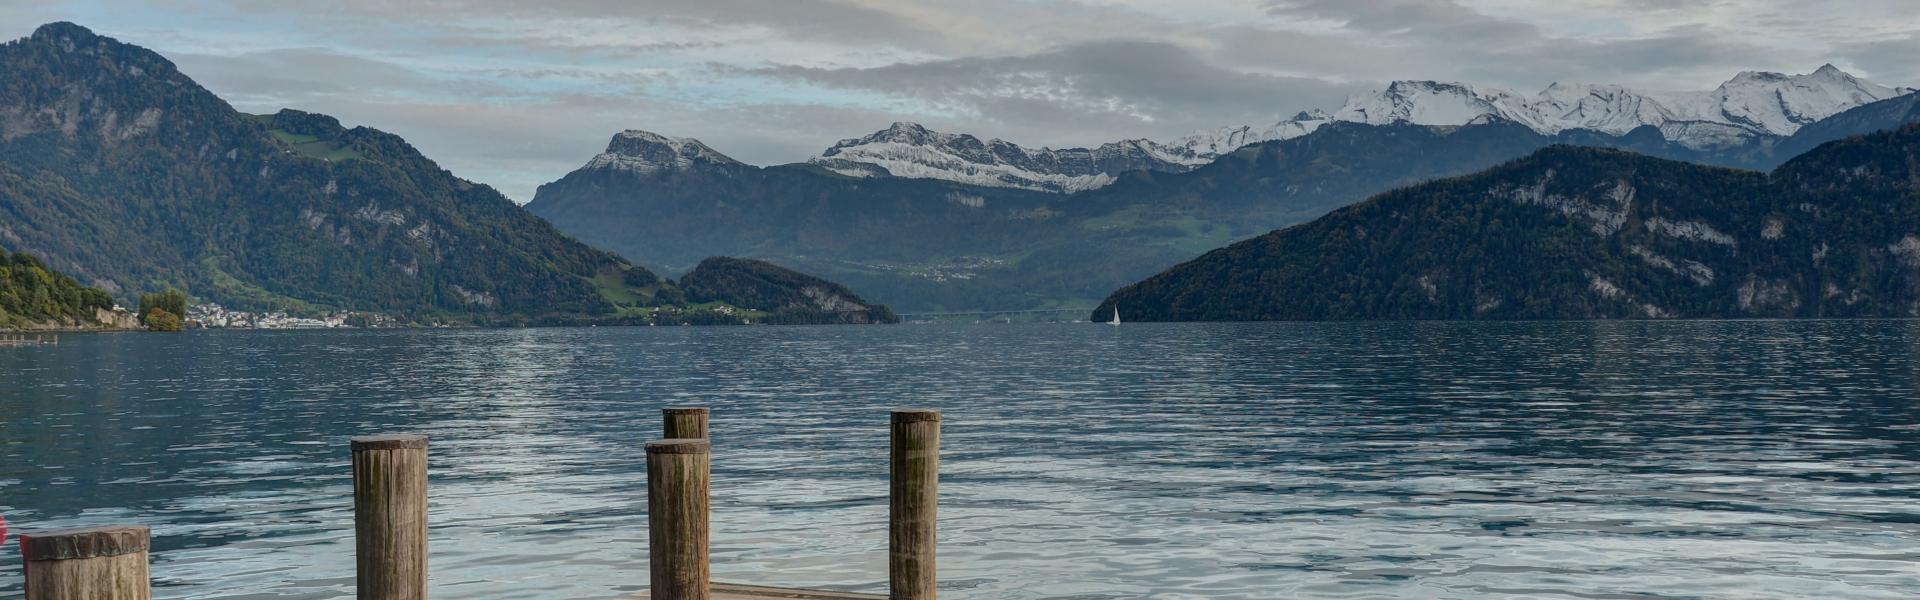 Lake Lucerne Scenic View of Nature